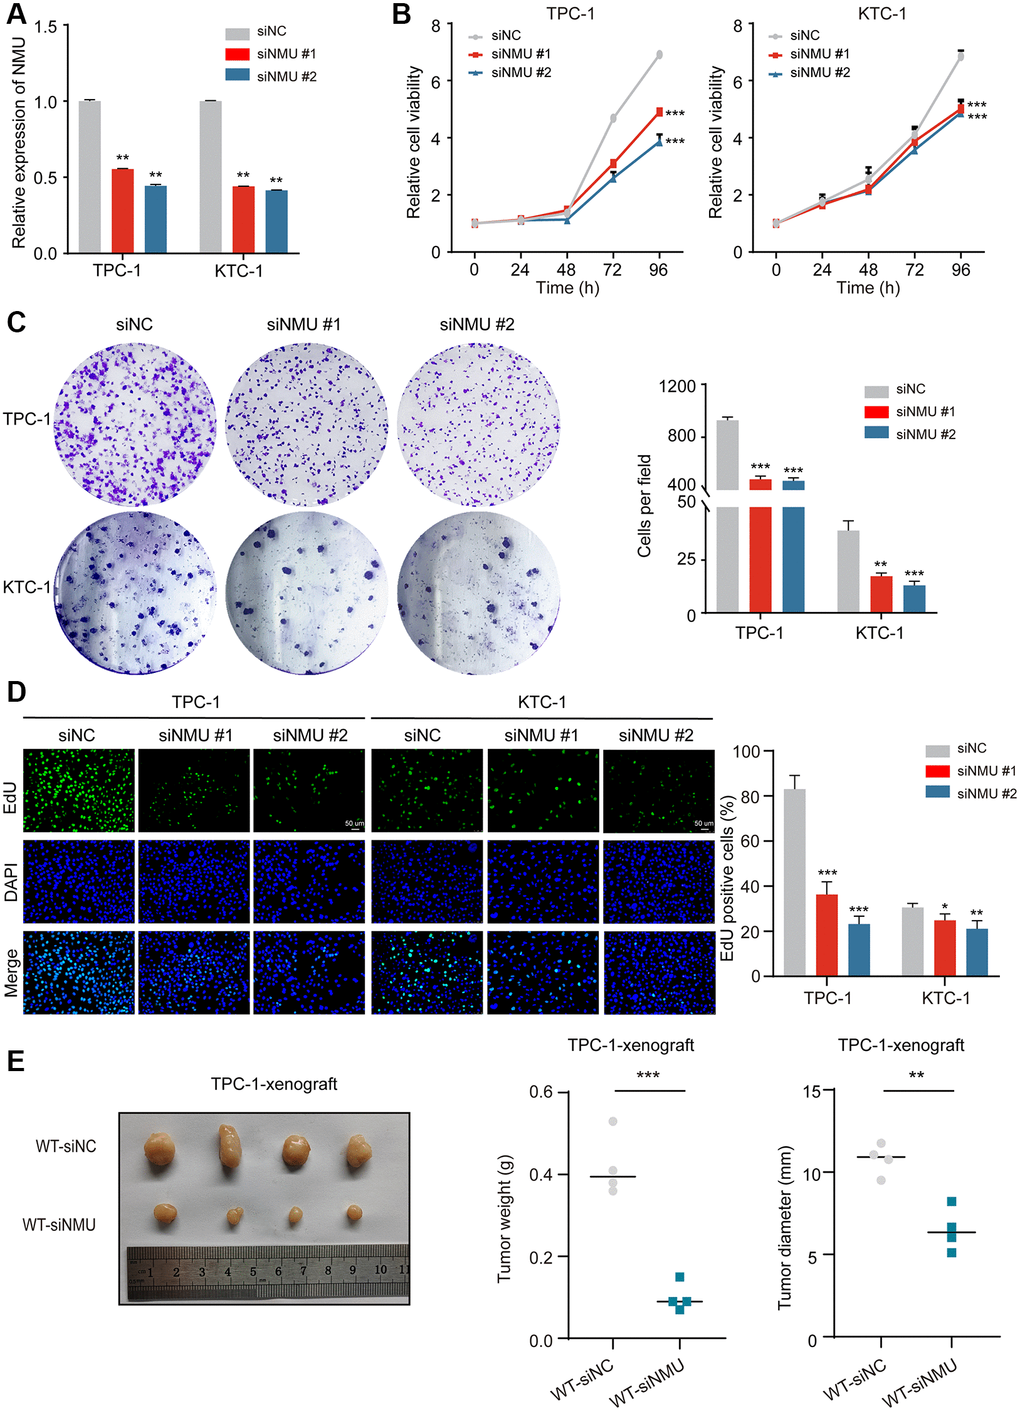 NMU promotes PTC cell viability, colony formation, cell proliferation abilities and tumor growth. (A) Suppression of NMU by NMU-siRNAs (siNMU#1 and siNMU#2) determined by RT-qPCR. (B) NMU-siRNAs significantly reduced cell viability of TPC-1 and KTC-1 cells compared to control group. (C) NMU-siRNAs significantly reduced colony formation number in TPC-1 and KTC-1 cells. (D) The inhibitory effect of NMU-siRNAs on cell proliferation was confirmed with the EdU assay (*p **p ***p E) Subcutaneous xenograft tumors formed by TPC-1 cells in nude mice. siRNA transfection was adopted to reduce NMU levels in tumors. Tumor weights and tumor diameter were measured for each group (n = 4 per group). NMU-siRNAs significantly inhibited the growth of tumors in nude mice. (**p ***p 